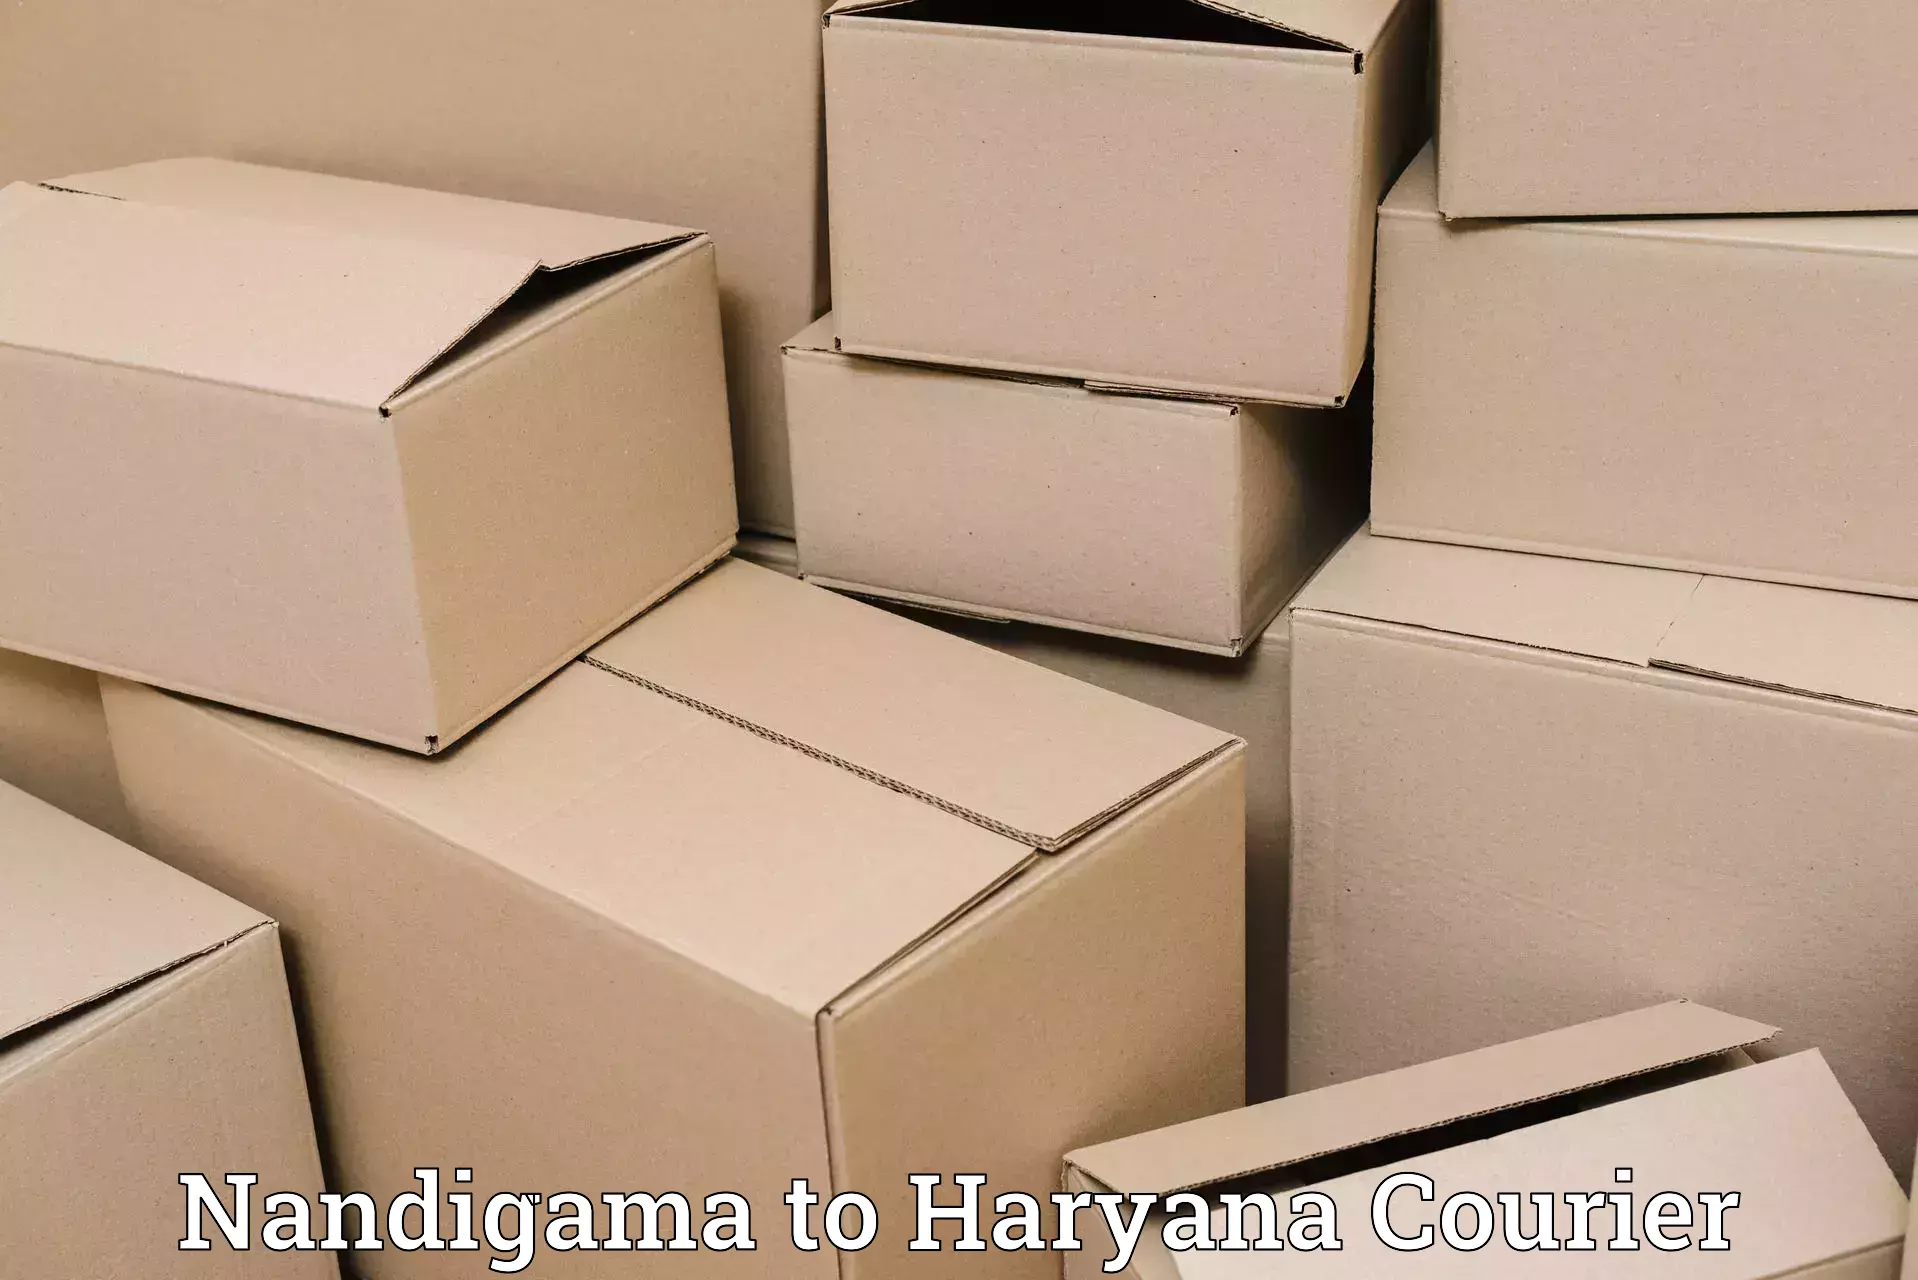 Customized delivery options Nandigama to Chaudhary Charan Singh Haryana Agricultural University Hisar